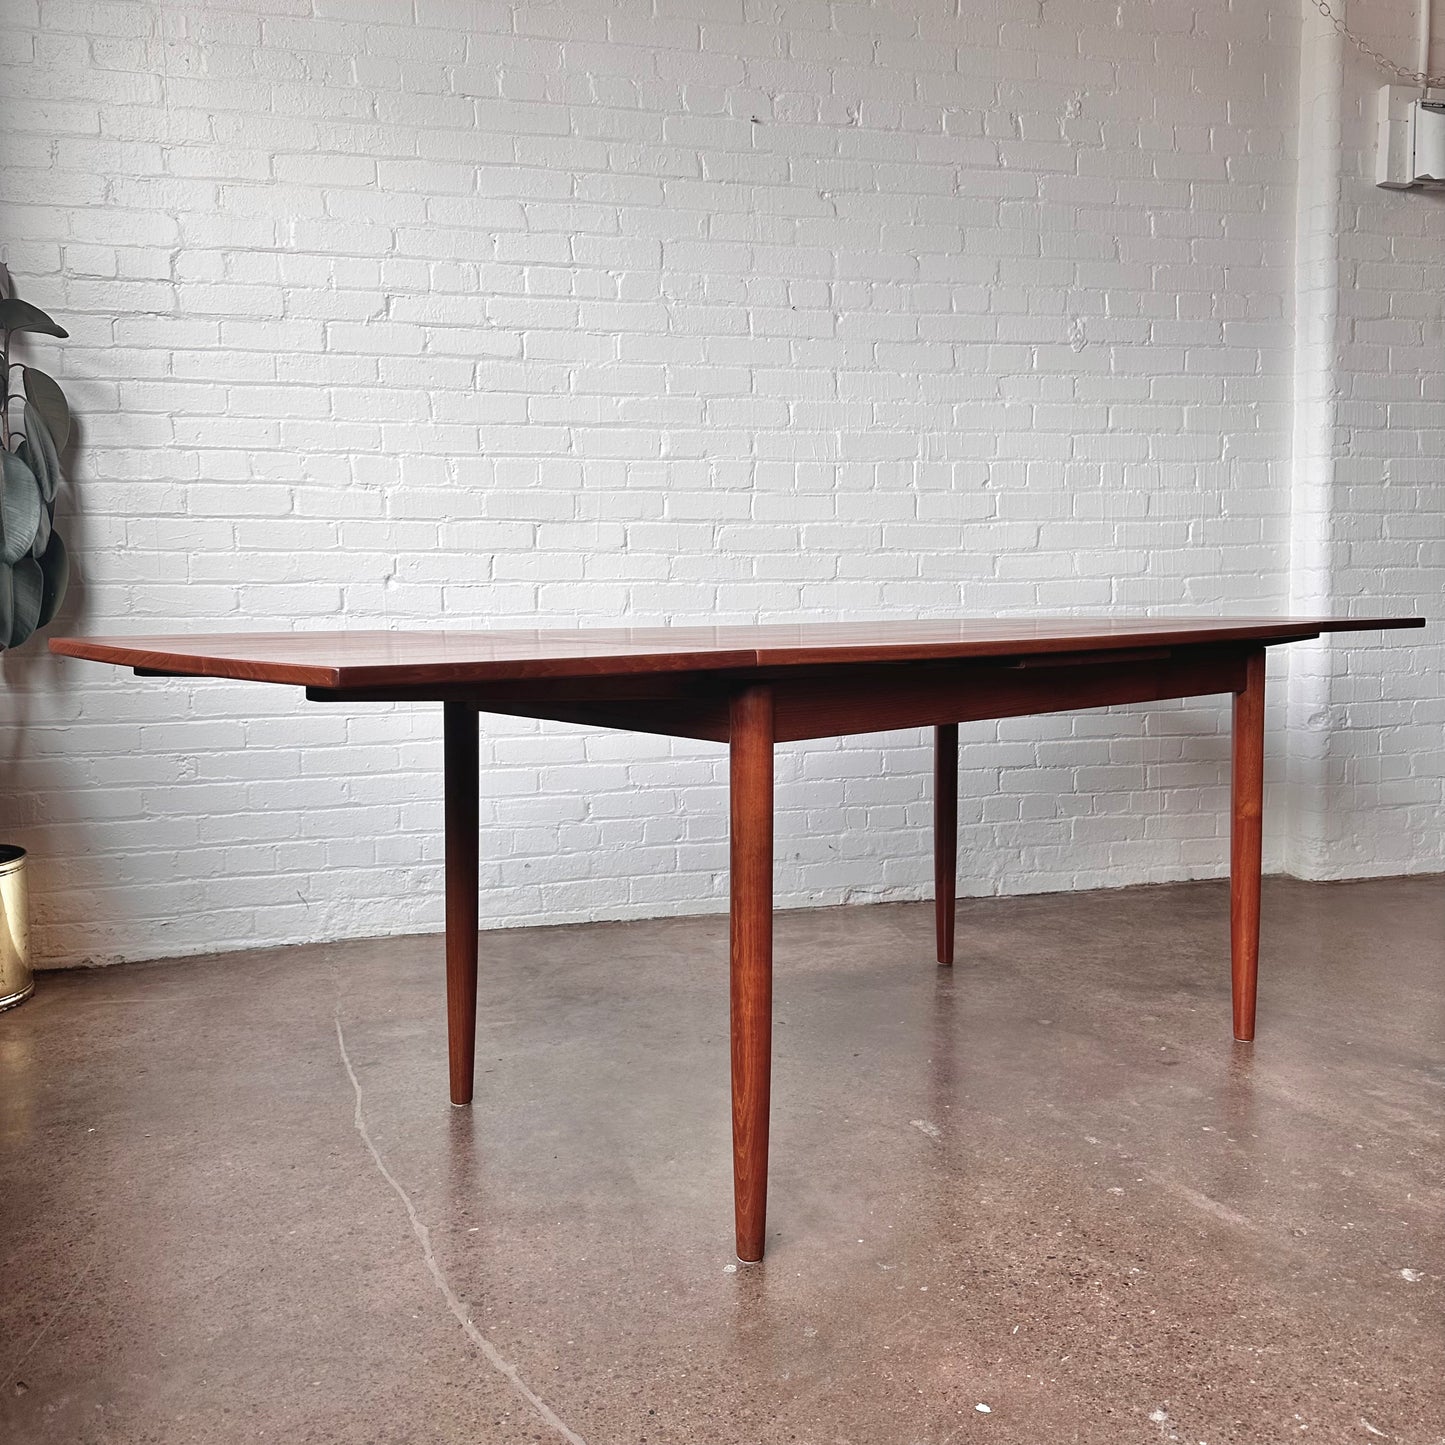 DANISH TEAK BOAT SHAPED DINING TABLE WITH DRAW LEAF